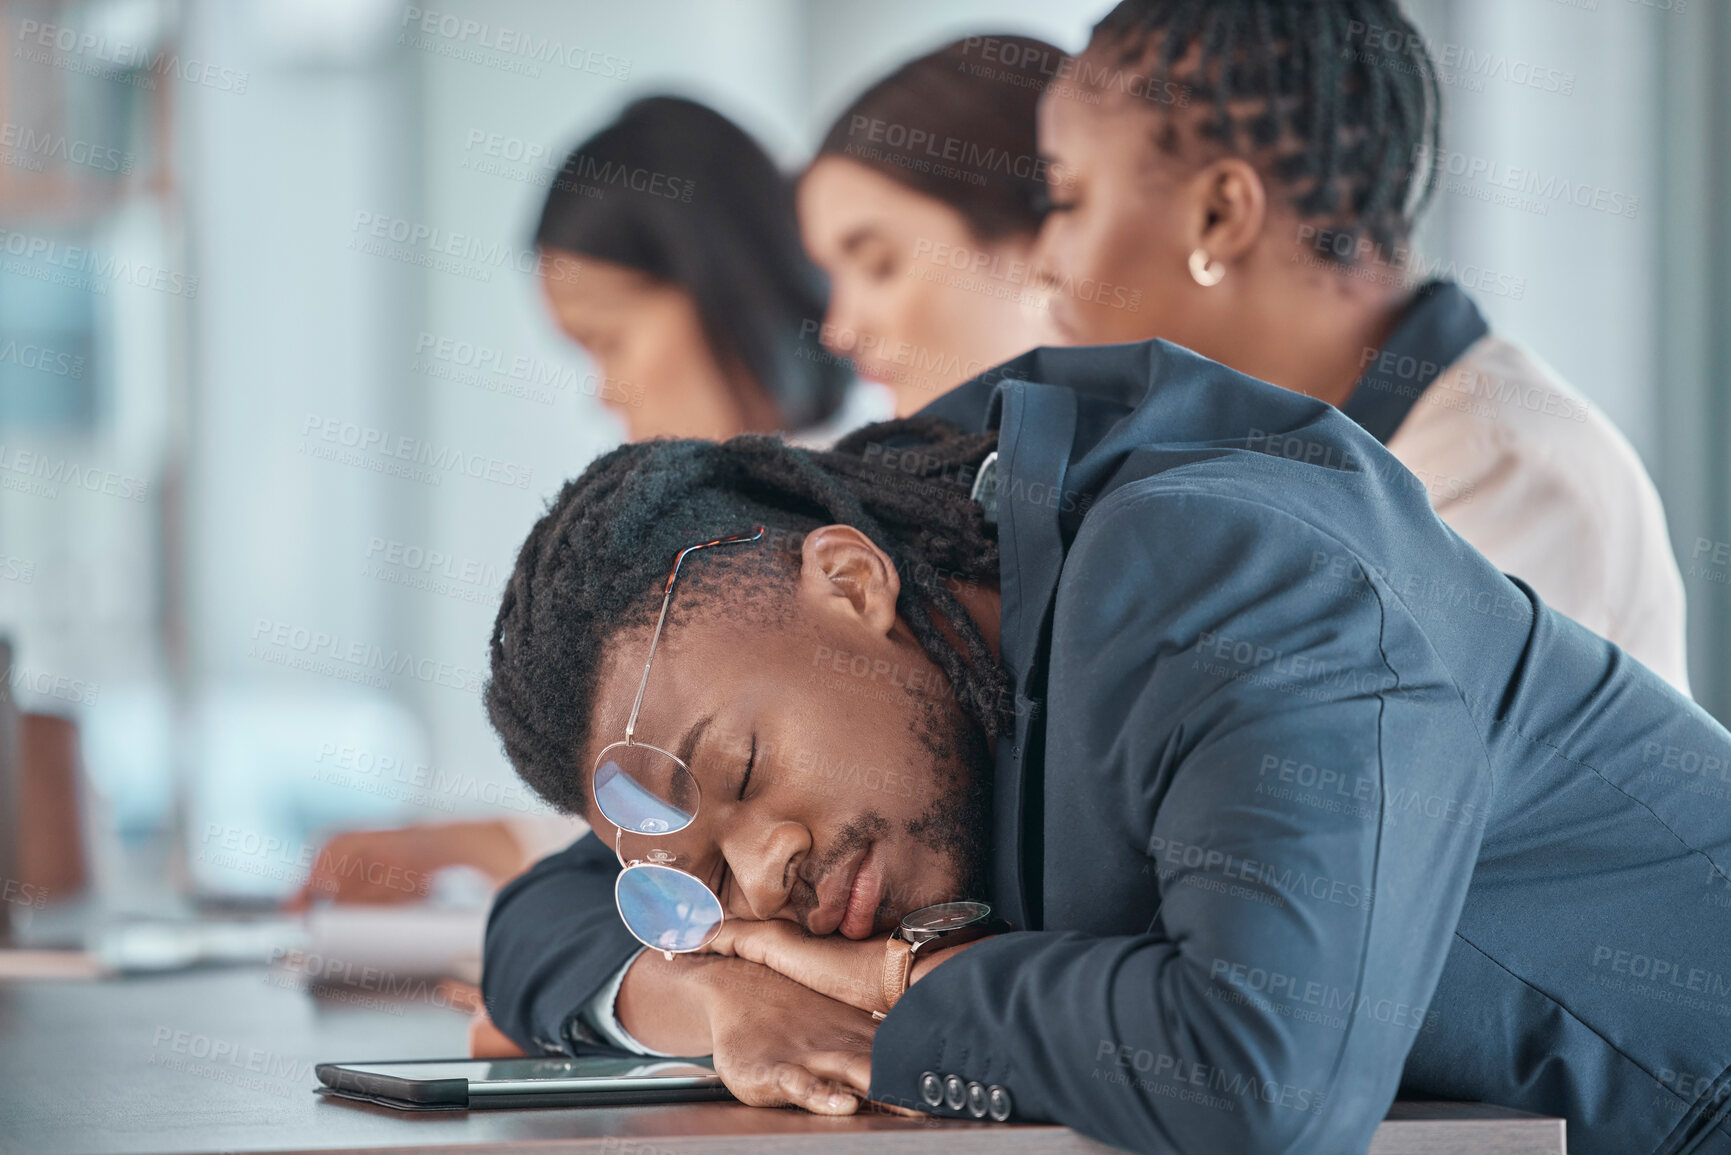 Buy stock photo Tired, sleeping and business man in meeting fatigue, burnout and low energy with focus, insomnia and career problem. Time management, depression and sleepy employee, worker or person in conference